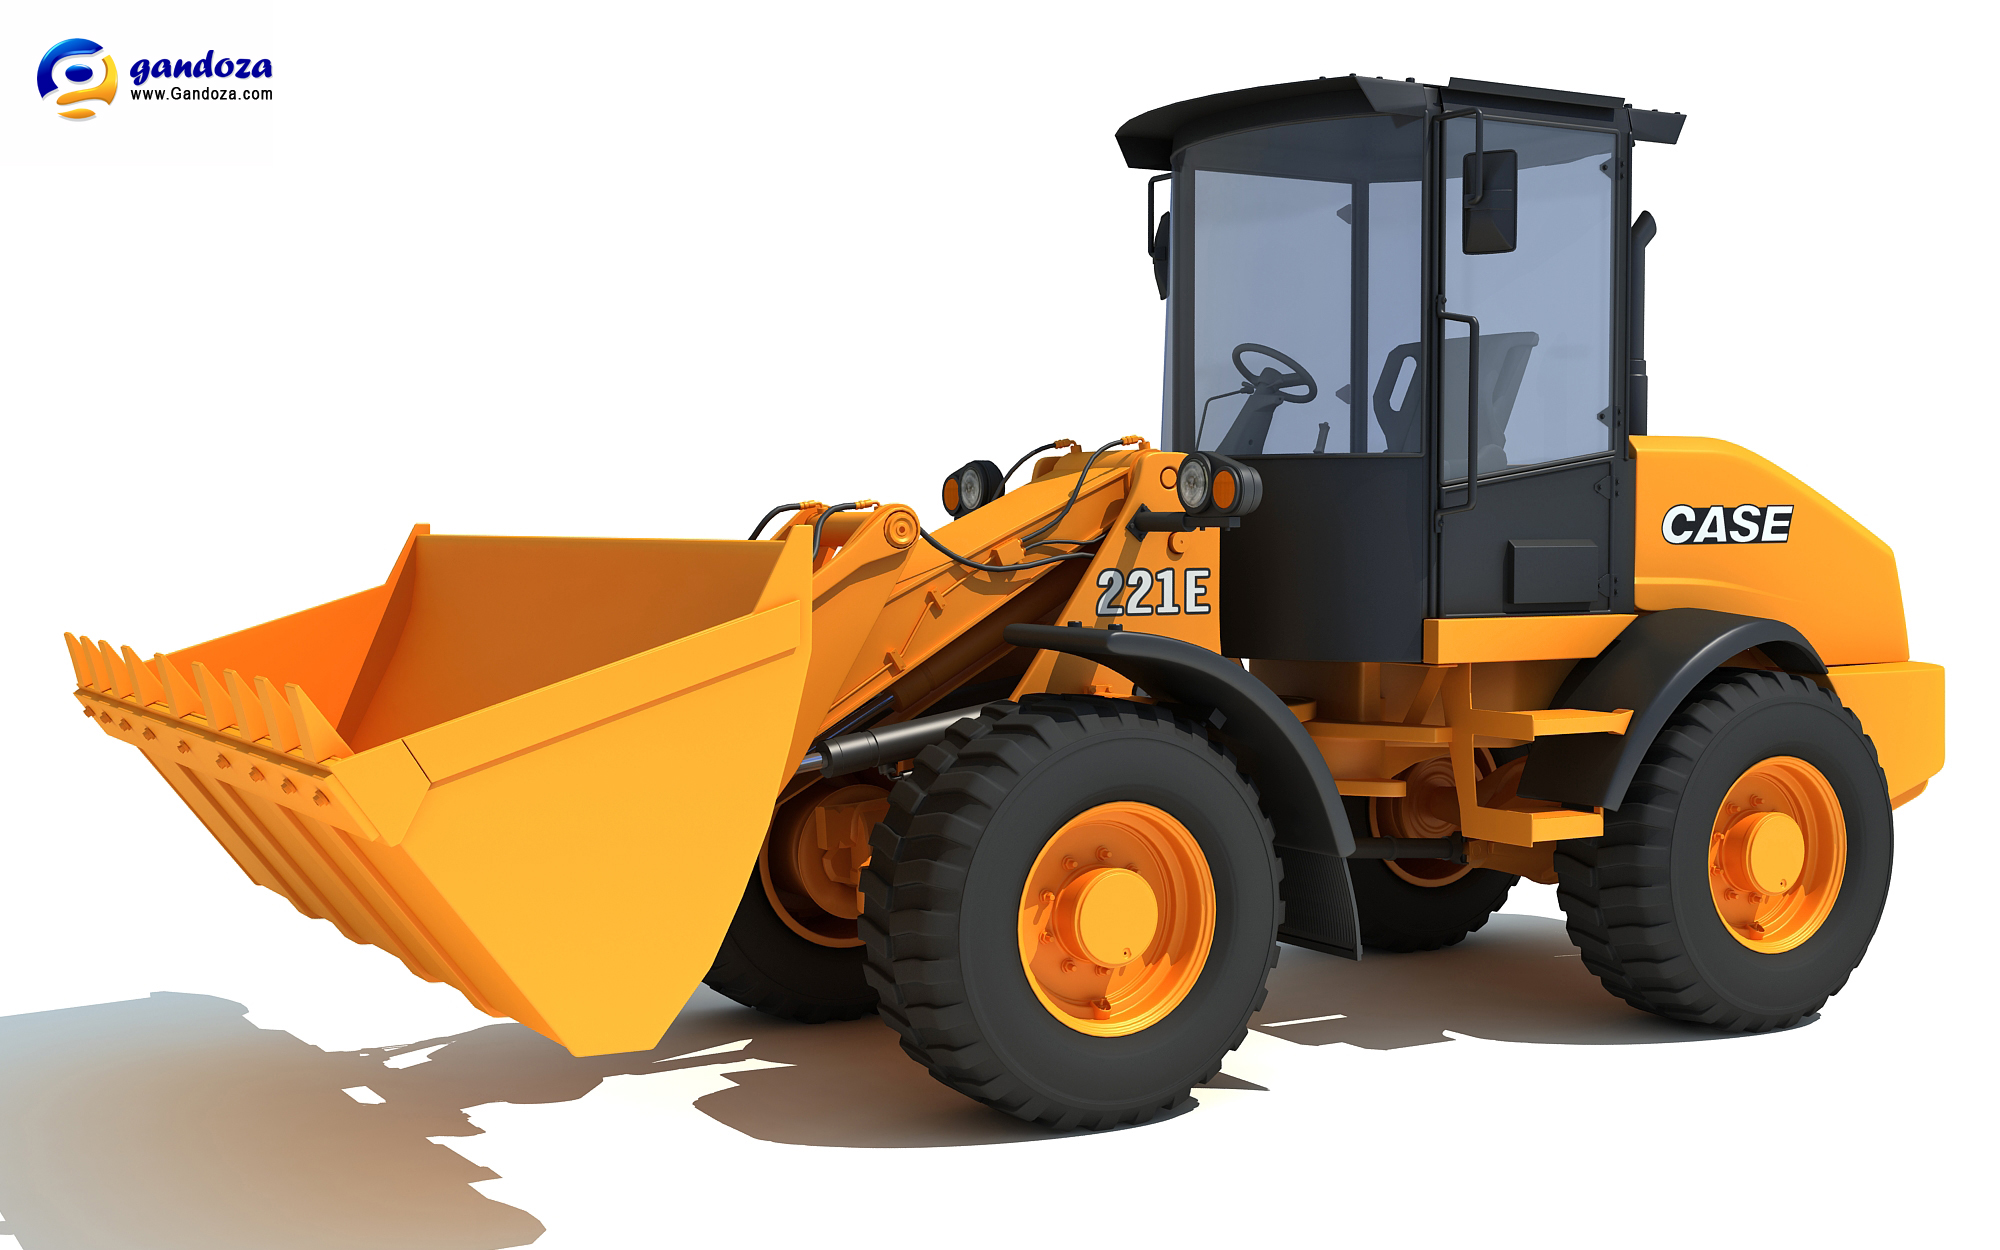 Amazing Case Wheel Loader Pictures & Backgrounds